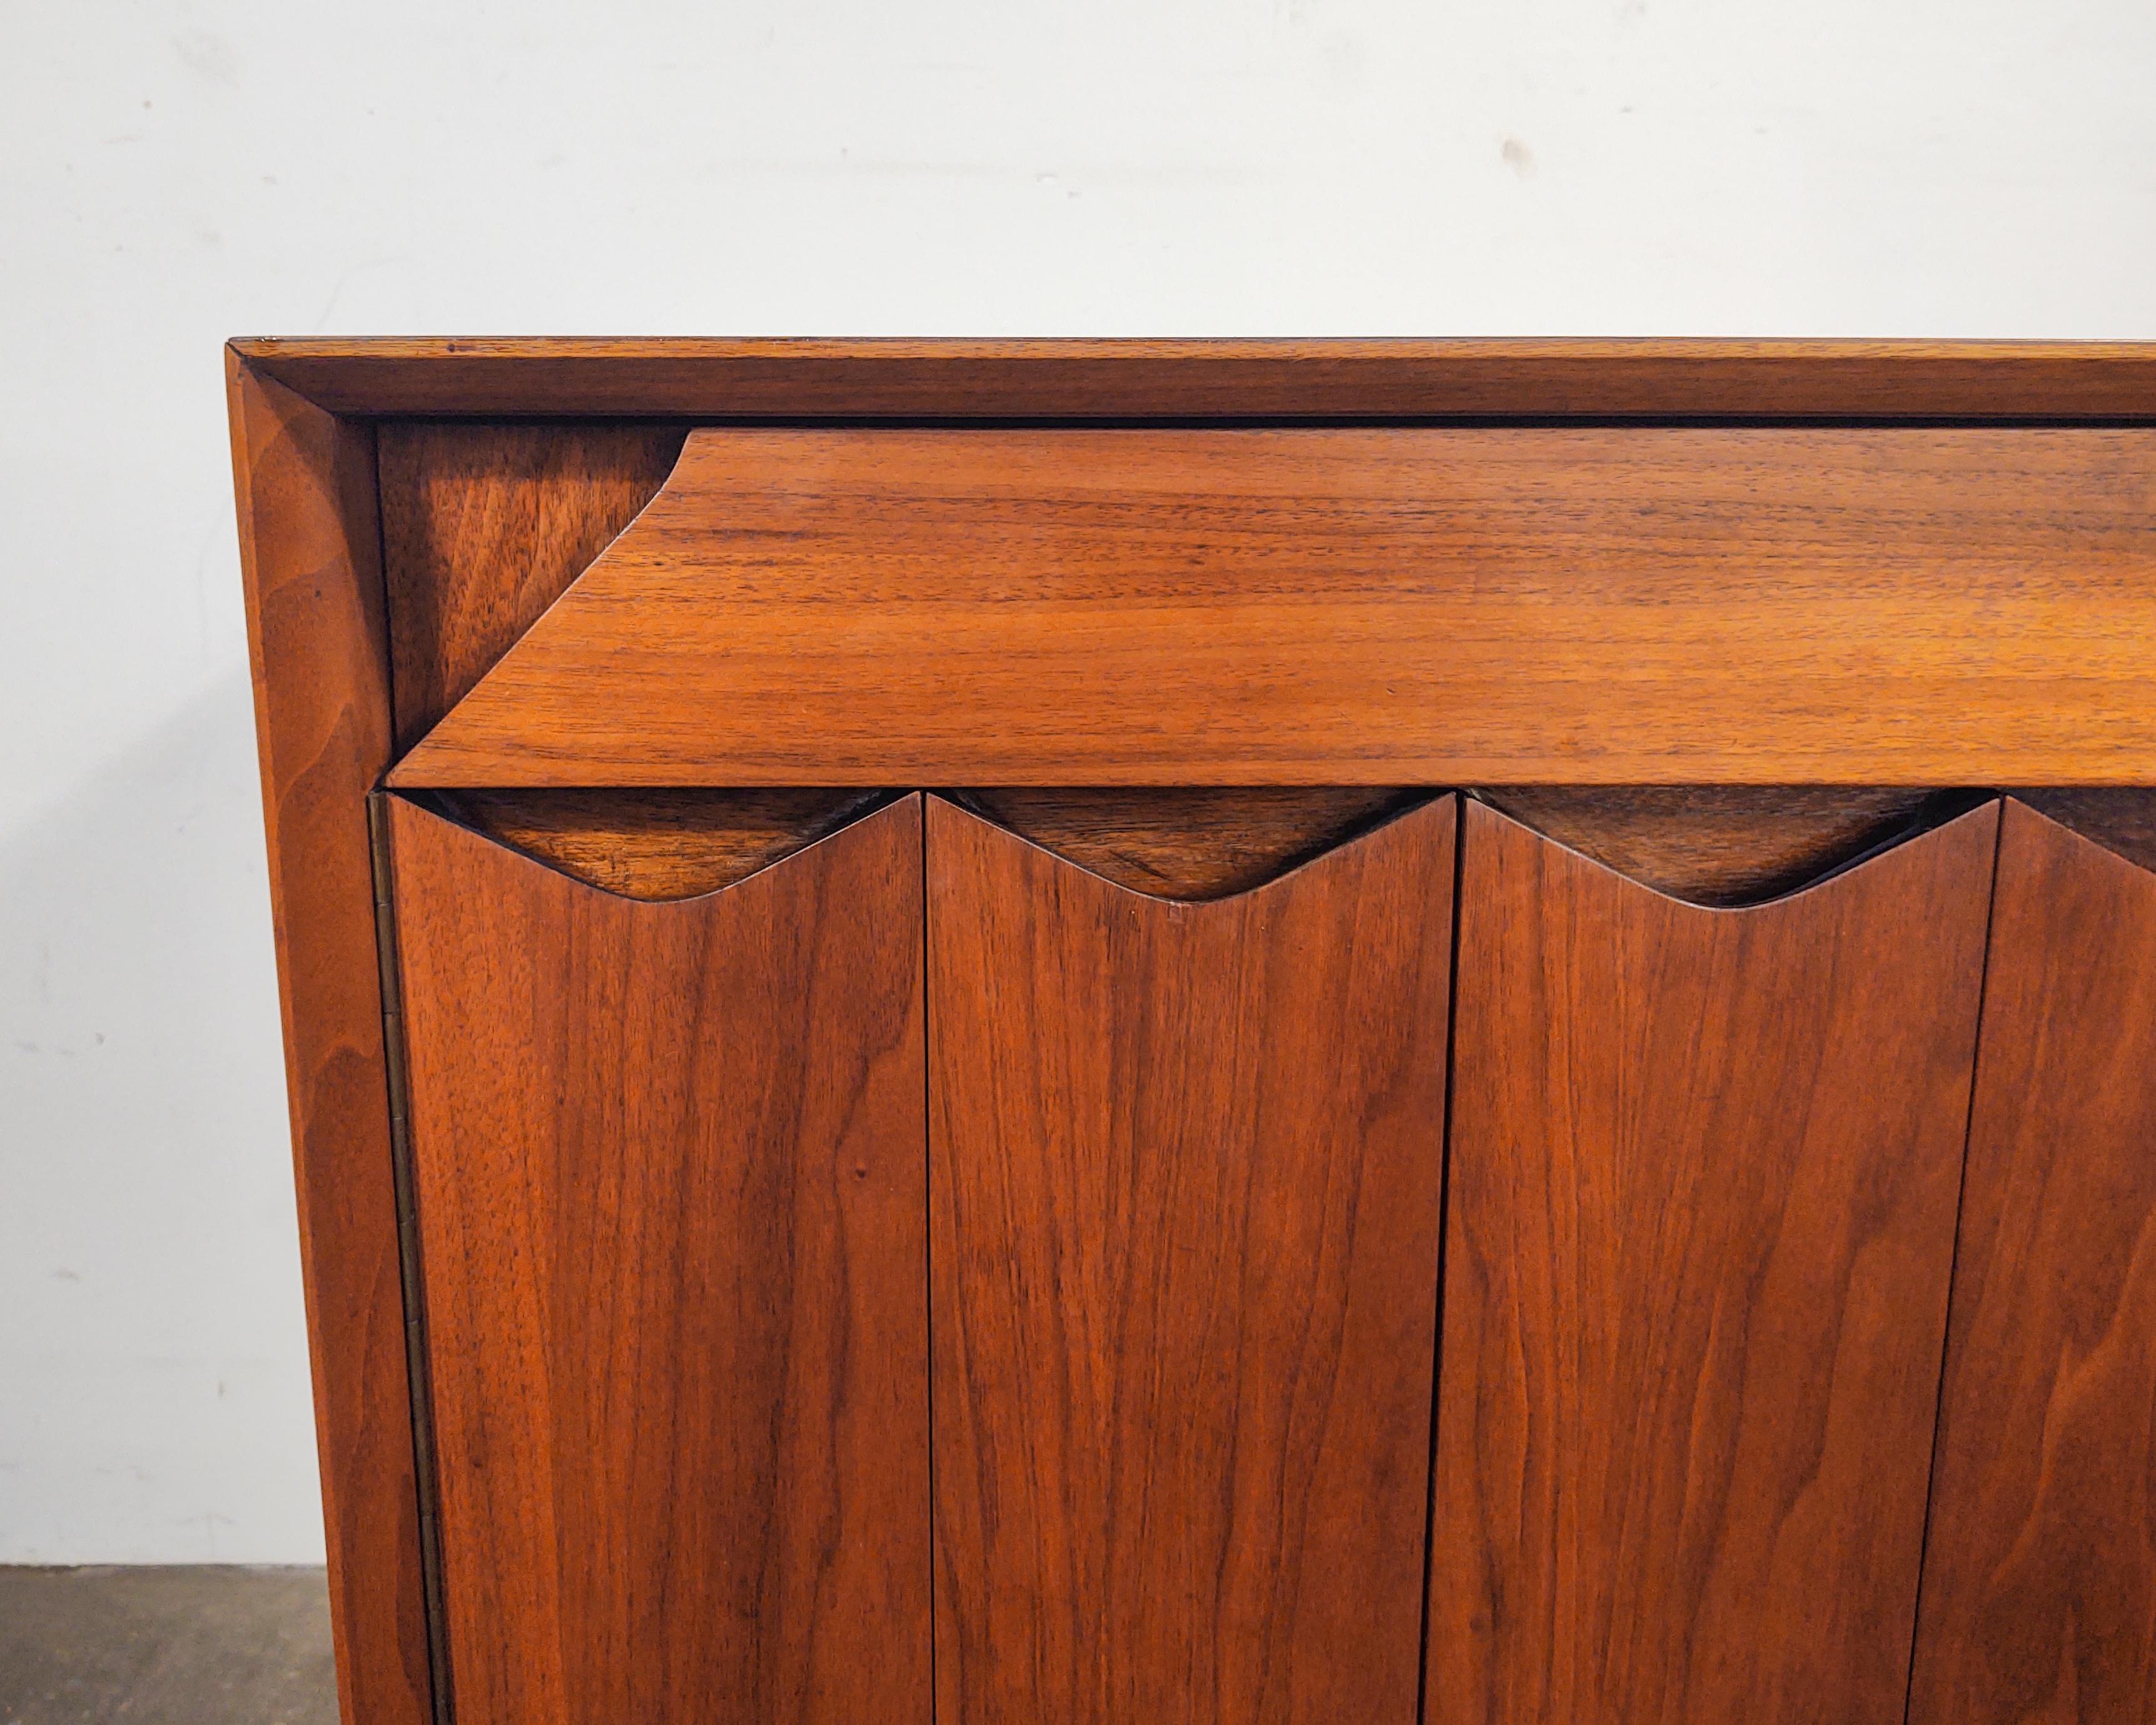 Rare walnut nightstand cabinet designed by Marc Berge for Grosfeld House circa 1960s. Unique design featuring geometric lines. Shallow drawer on top and bifold cabinet below with removable shelf. Excellent craftsmanship with solid wood construction